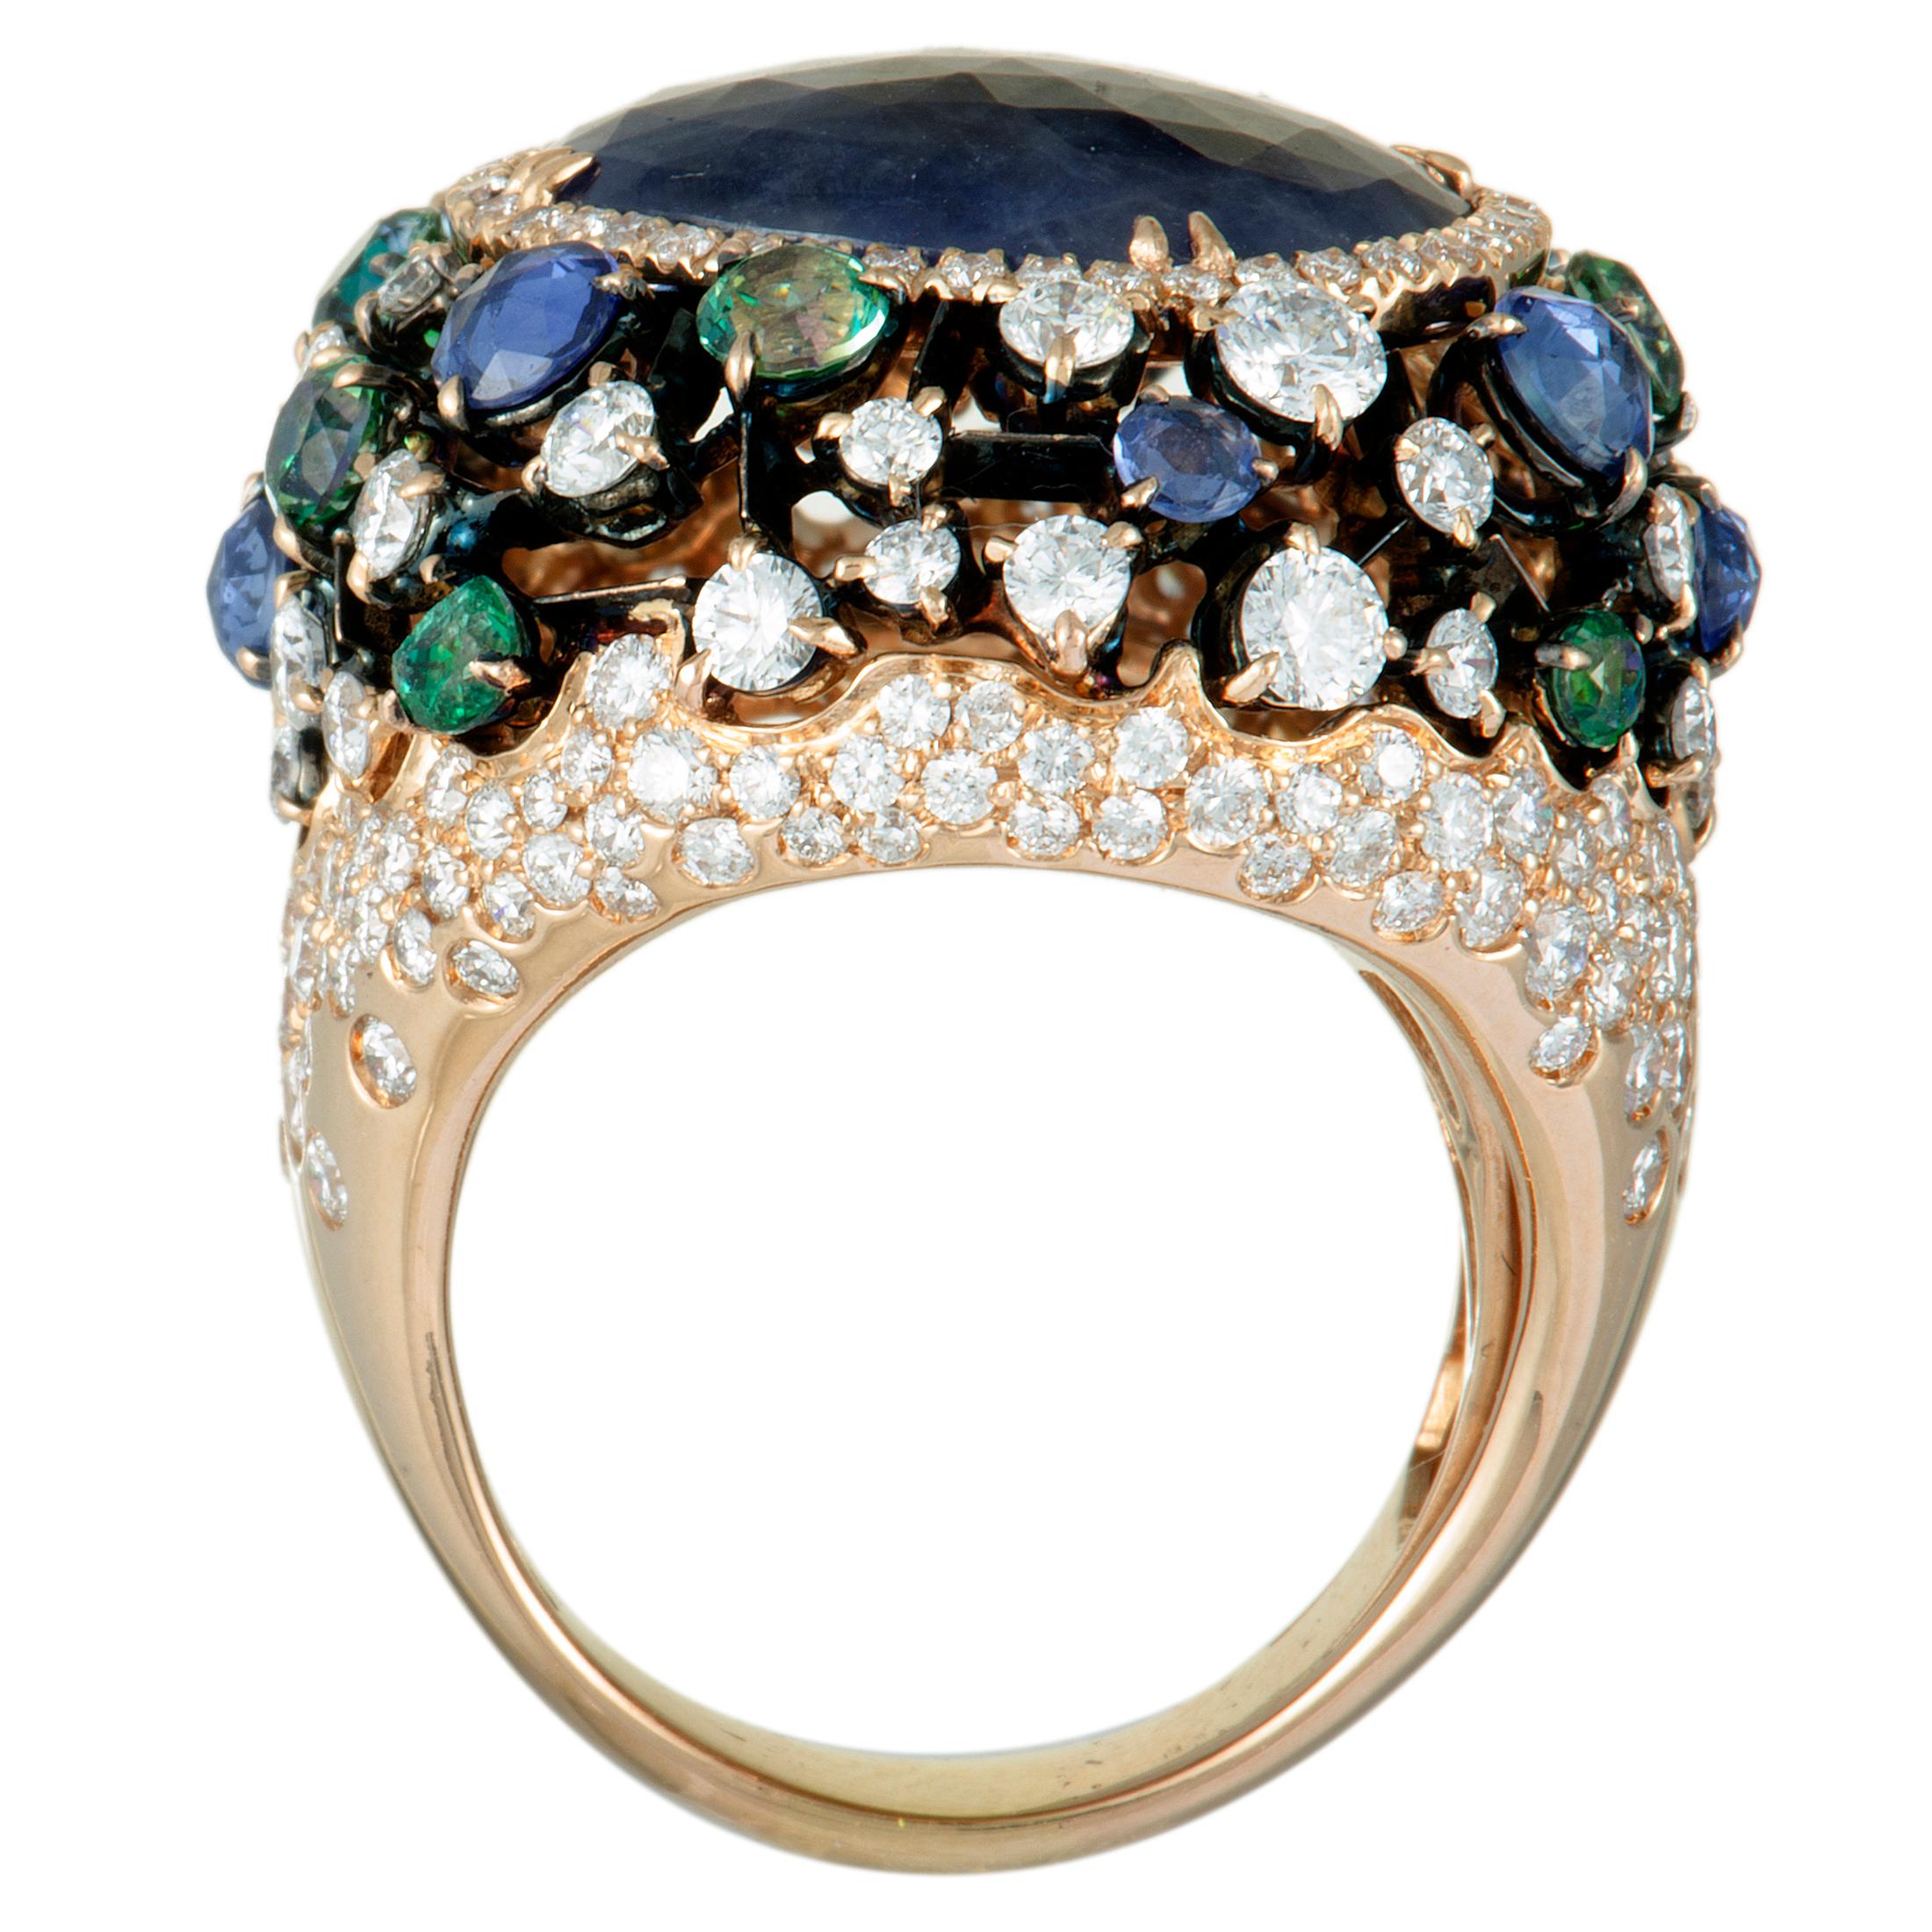 A stunningly resplendent effect is achieved in this magnificent ring by setting an incredibly attractive blend of eye-catching gems against the charmingly radiant surface of gold. The ring is embellished with a plethora of diamonds and sapphires